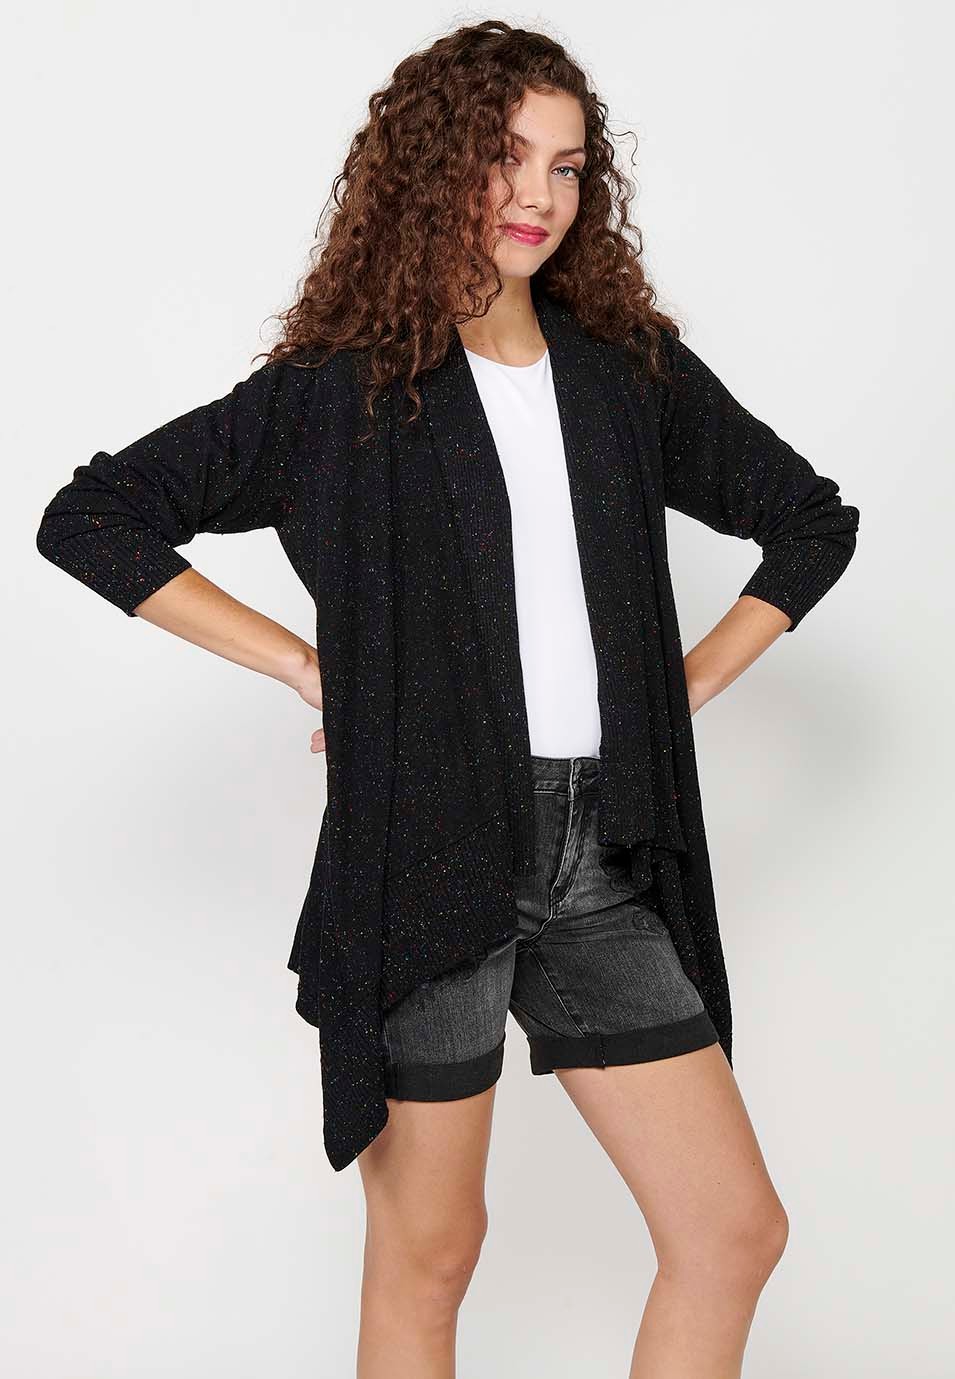 Long-sleeved tricot jacket with asymmetrical finish. Black Marbled Tricot for Women 3